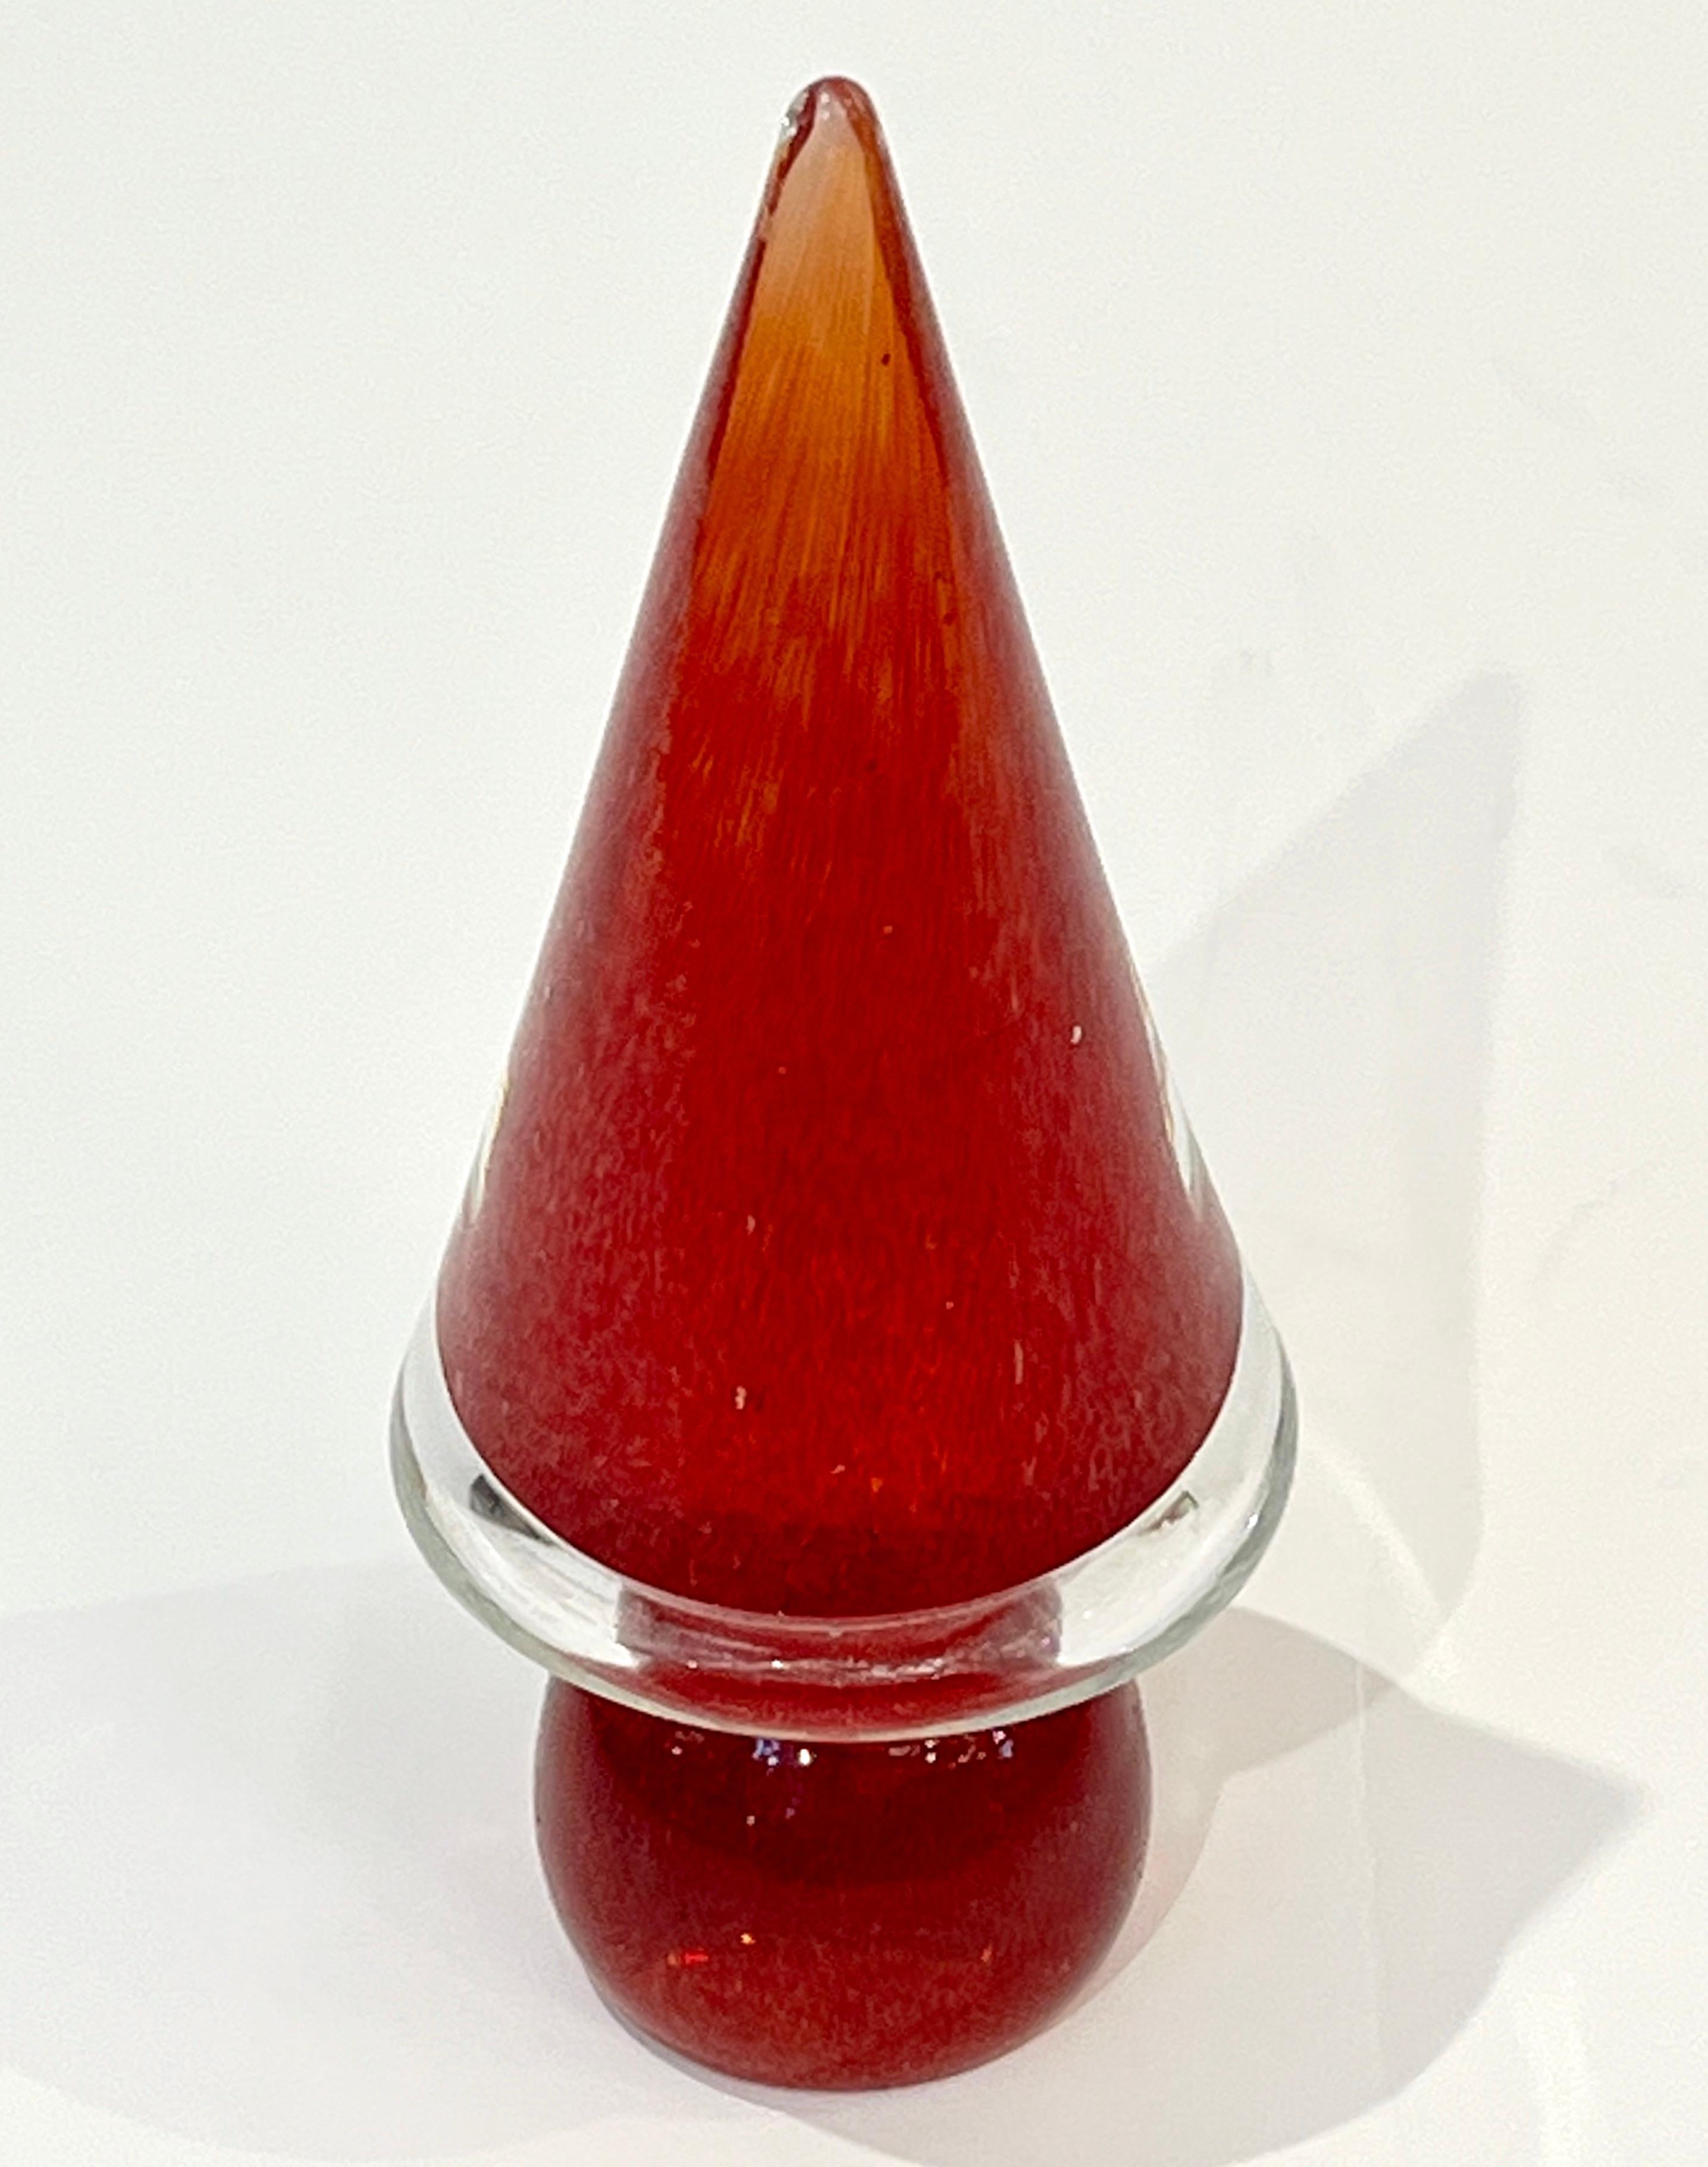 Christmas tree sculpture of organic sleek Minimalist cone design, in mouth-blown solid Murano glass, entirely handcrafted, a vintage Venetian creation. This piece comes from a private collection of different colored glass trees by Formia, some